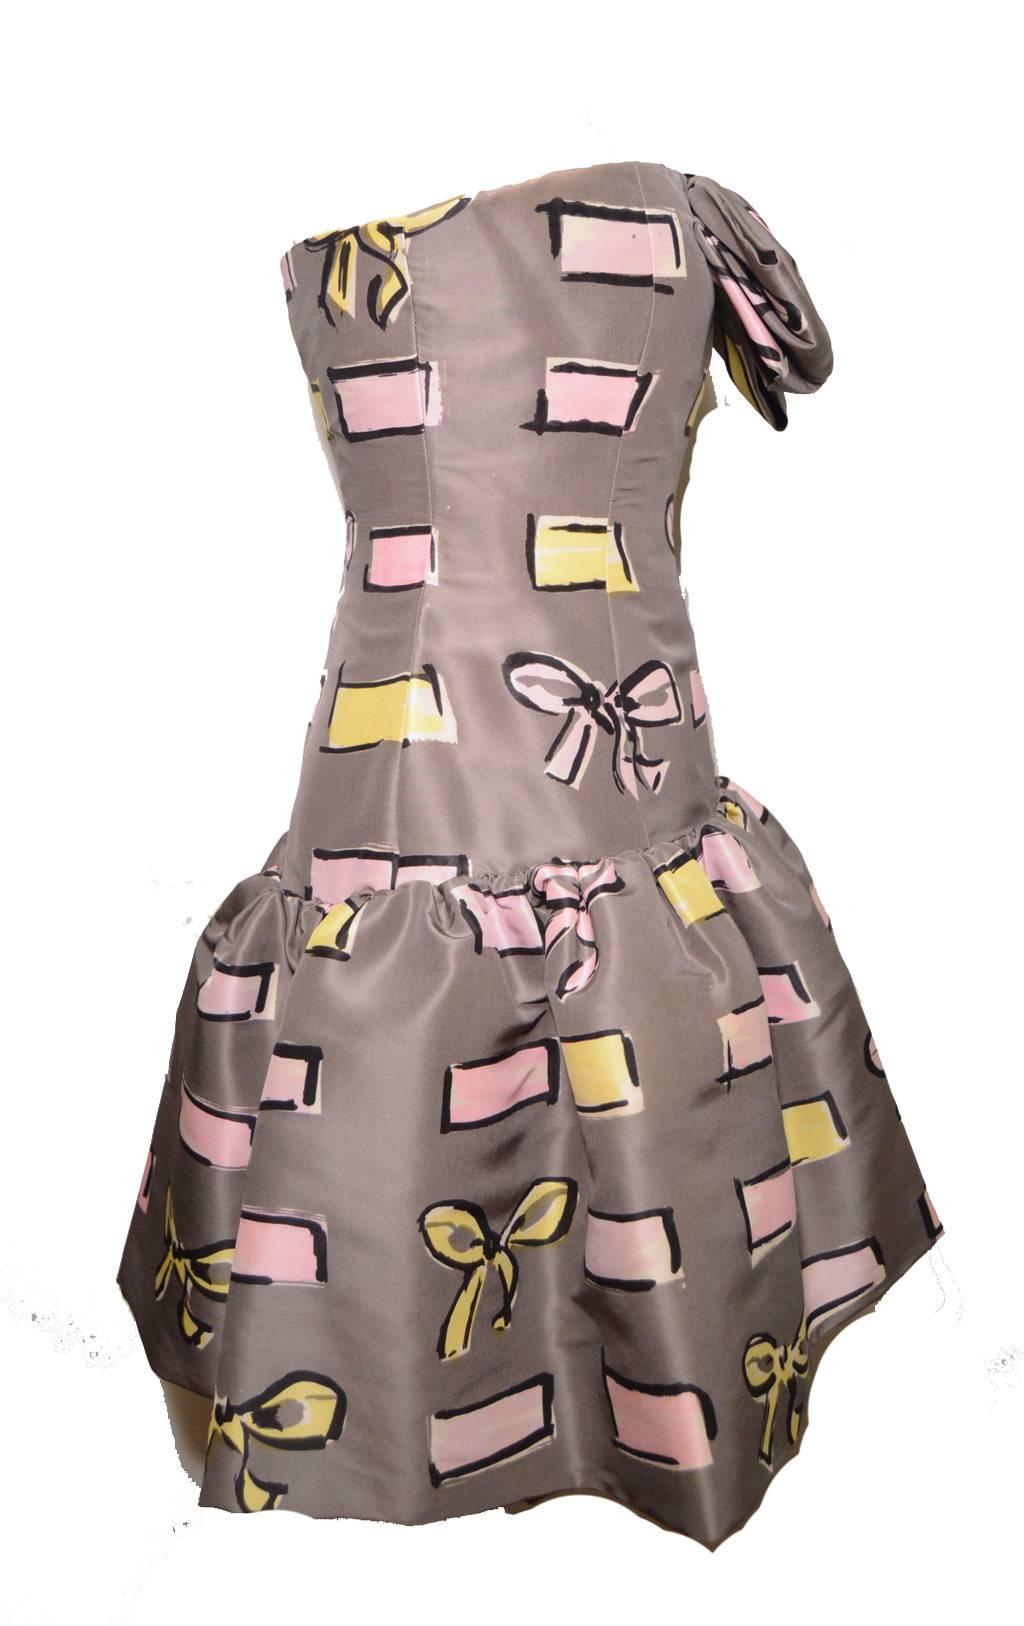 Grey silk taffeta with unique block and bow print in yellow and pink with black outline.  Large front bow at bust. Pencil skirt with ruffle skirt overlay.  14.5